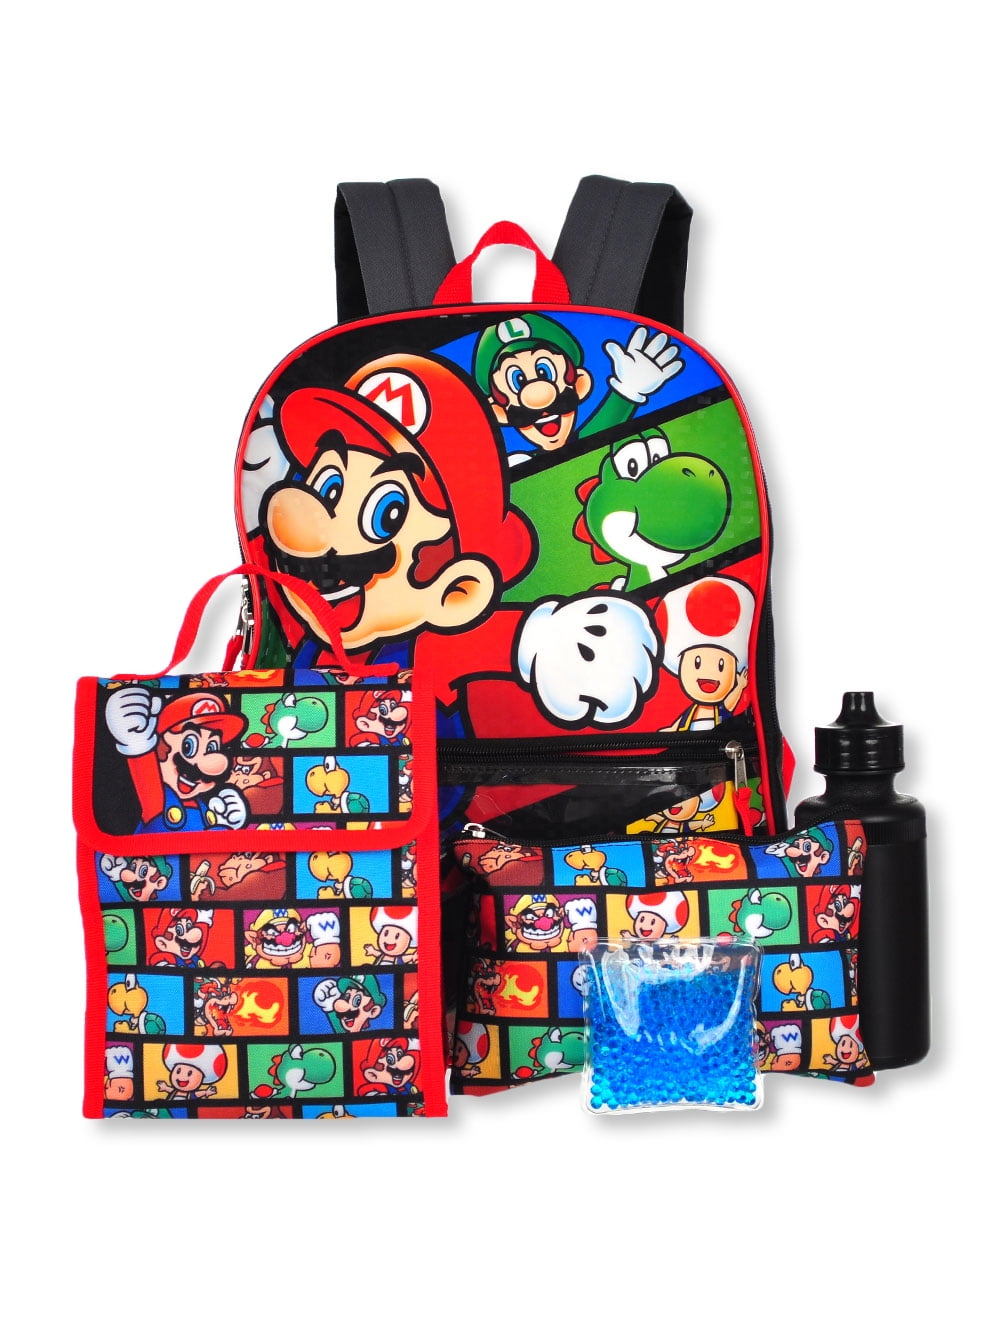 ~SUPER MARIO BROTHERS...NEW...5 PIECE BACK PACK TRAVEL BAG..8.99 